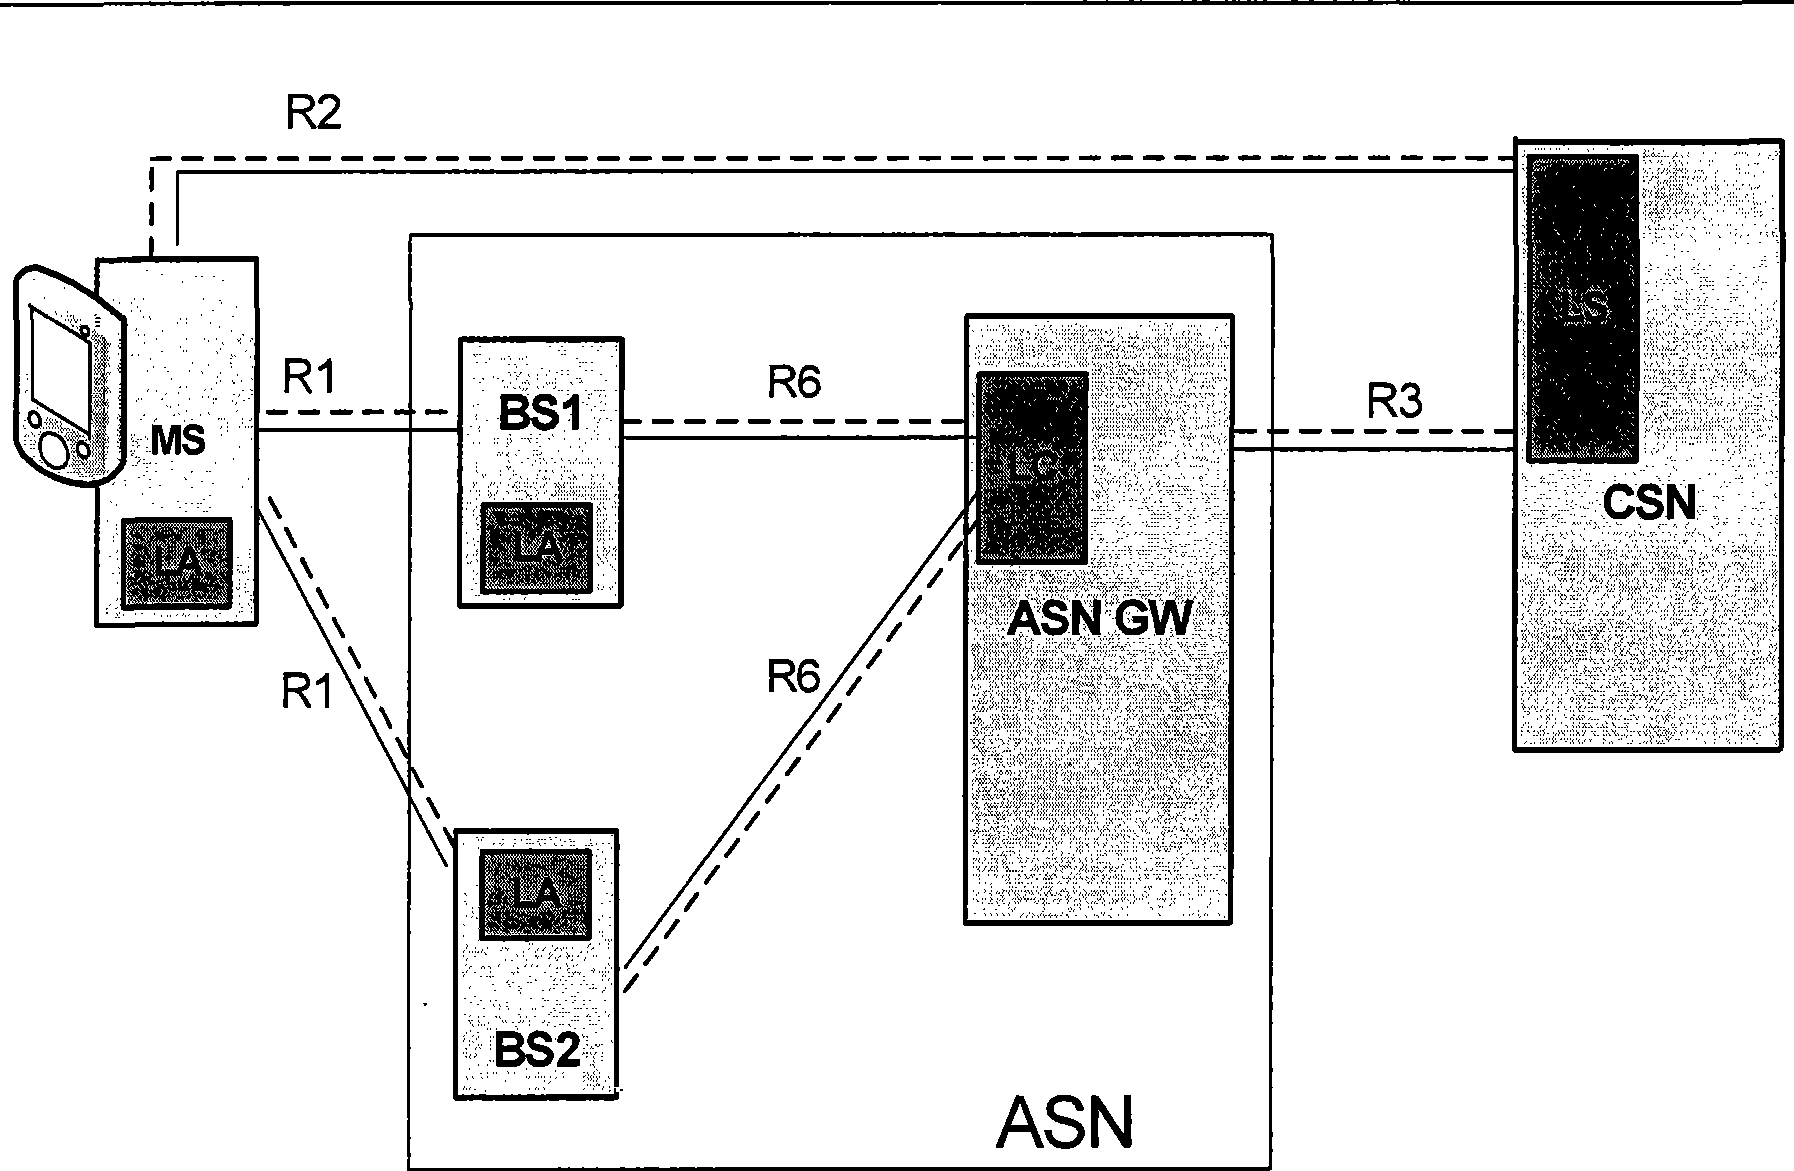 Method for MS location capability negotiation in Wimax communication system